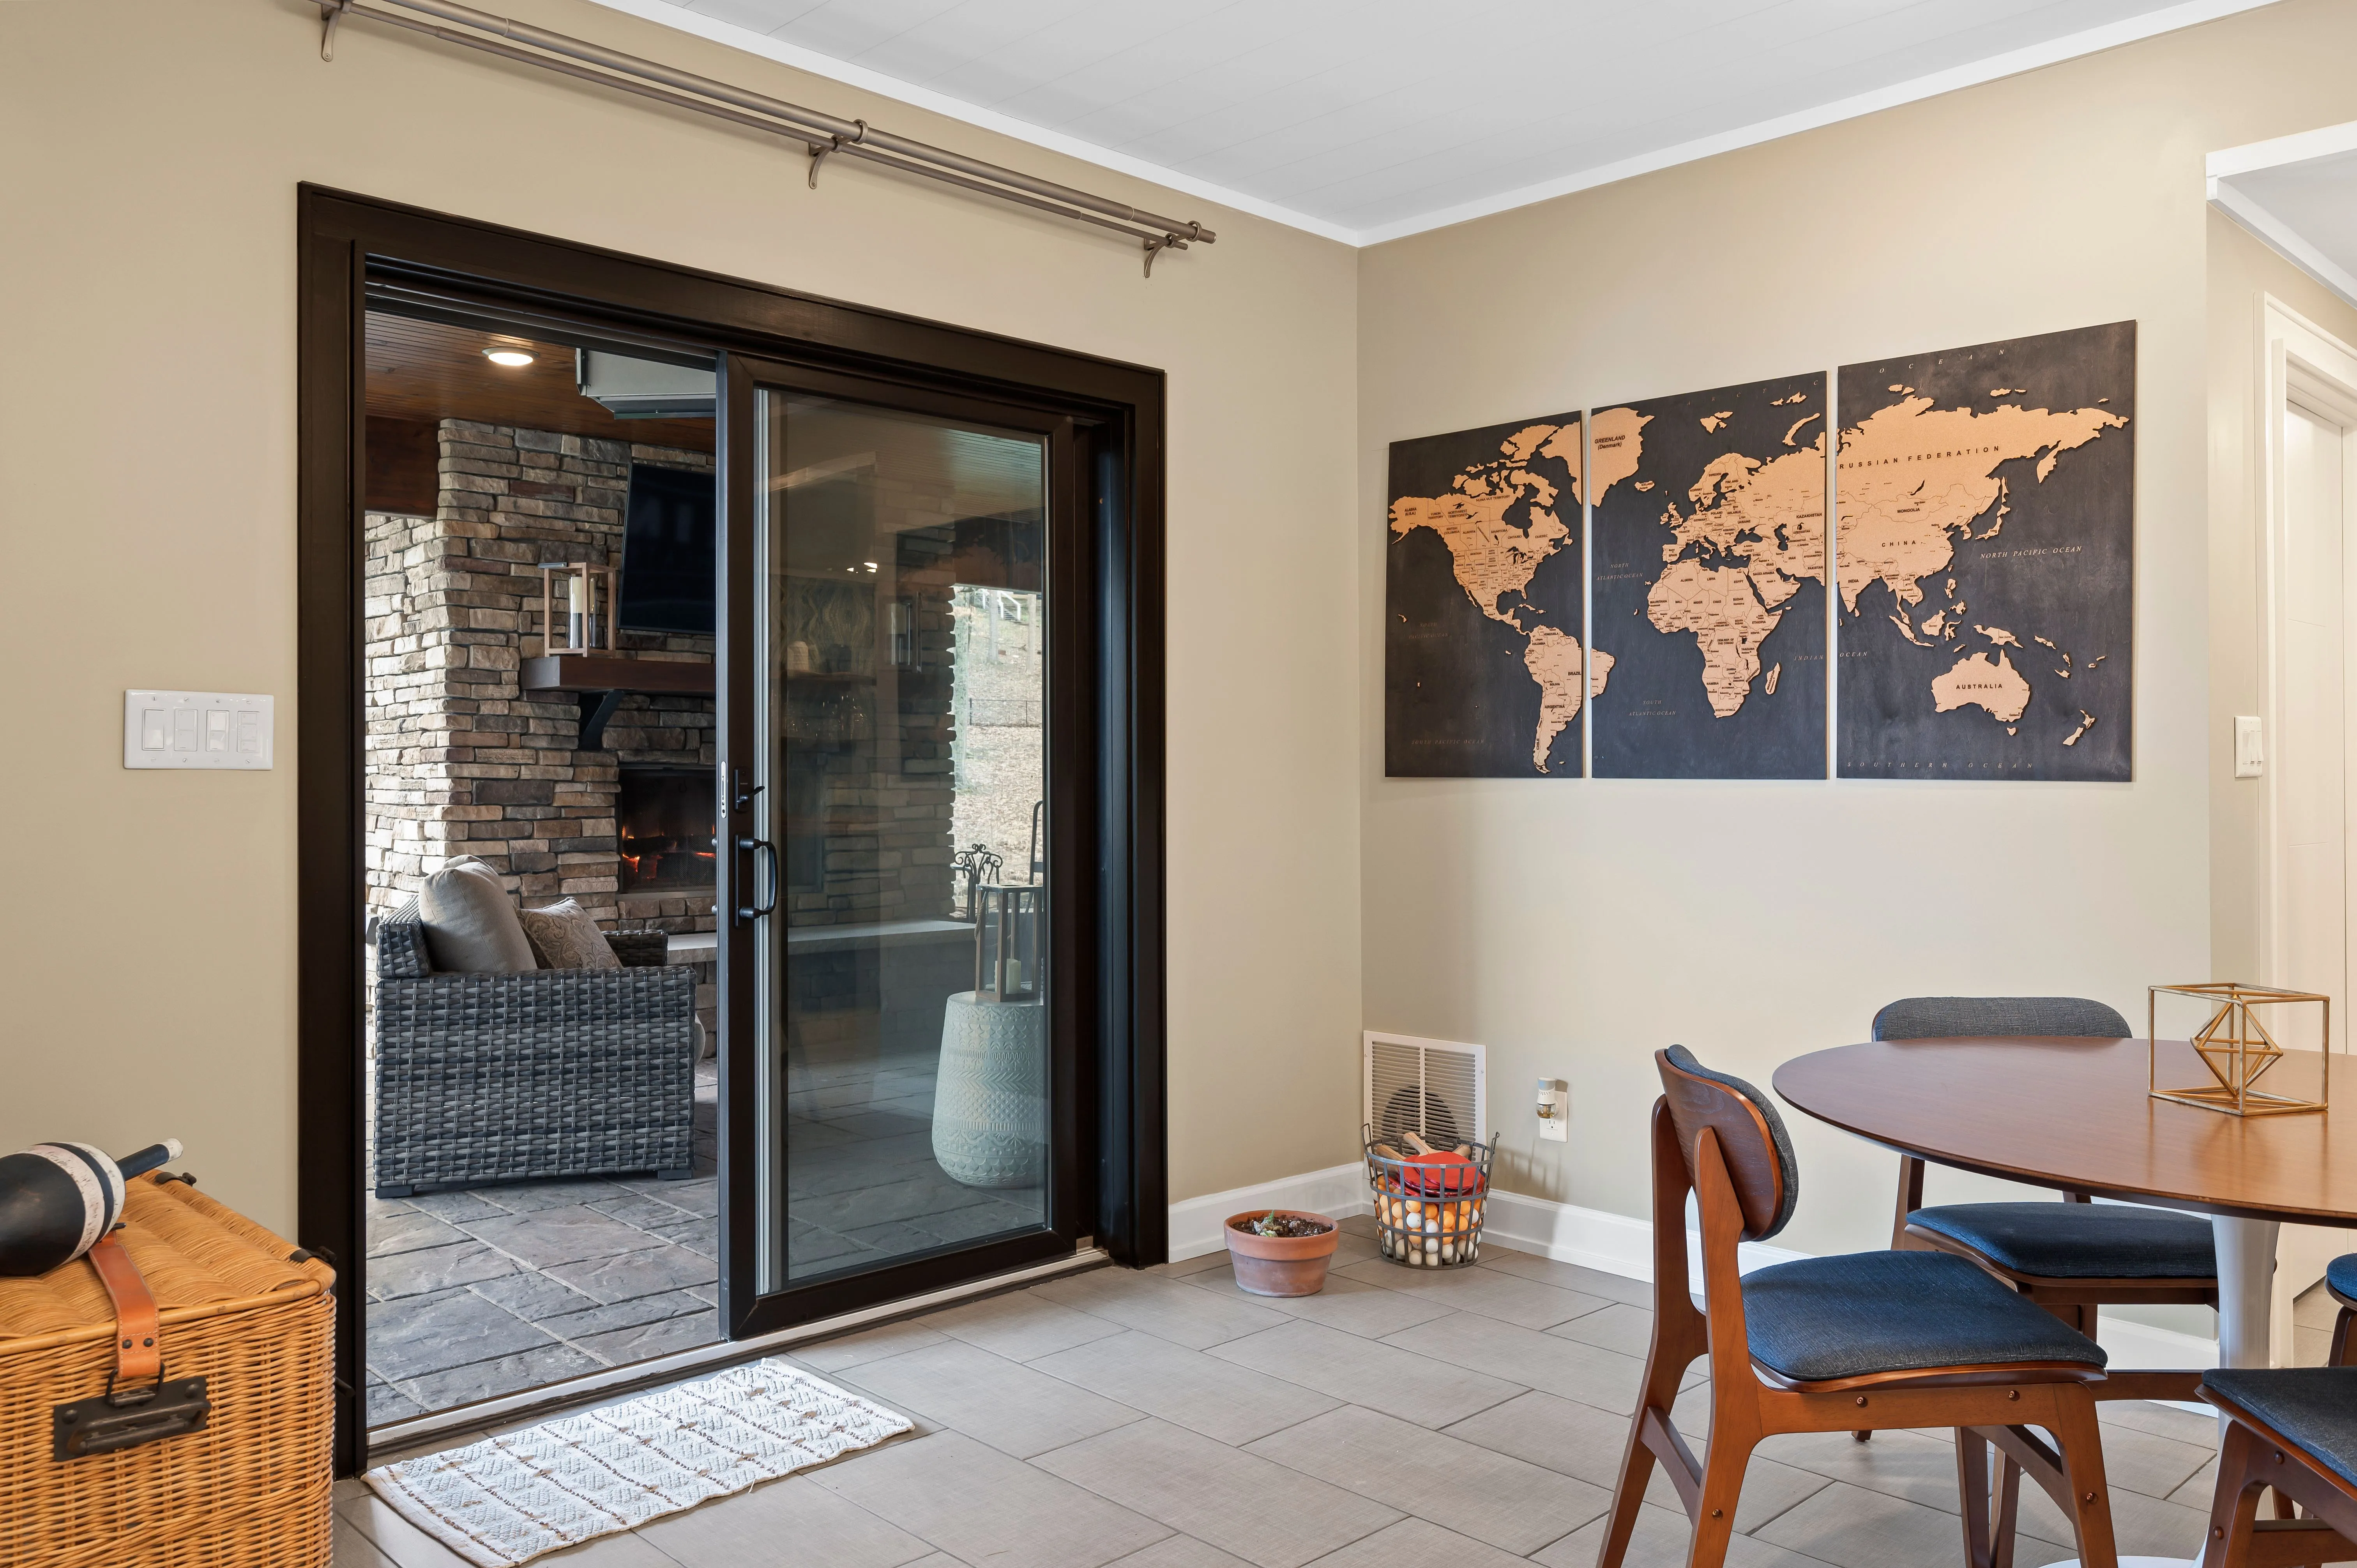 Interior view of a modern room with sliding glass door, world map wall art, wooden dining table with chairs, and a wicker basket.